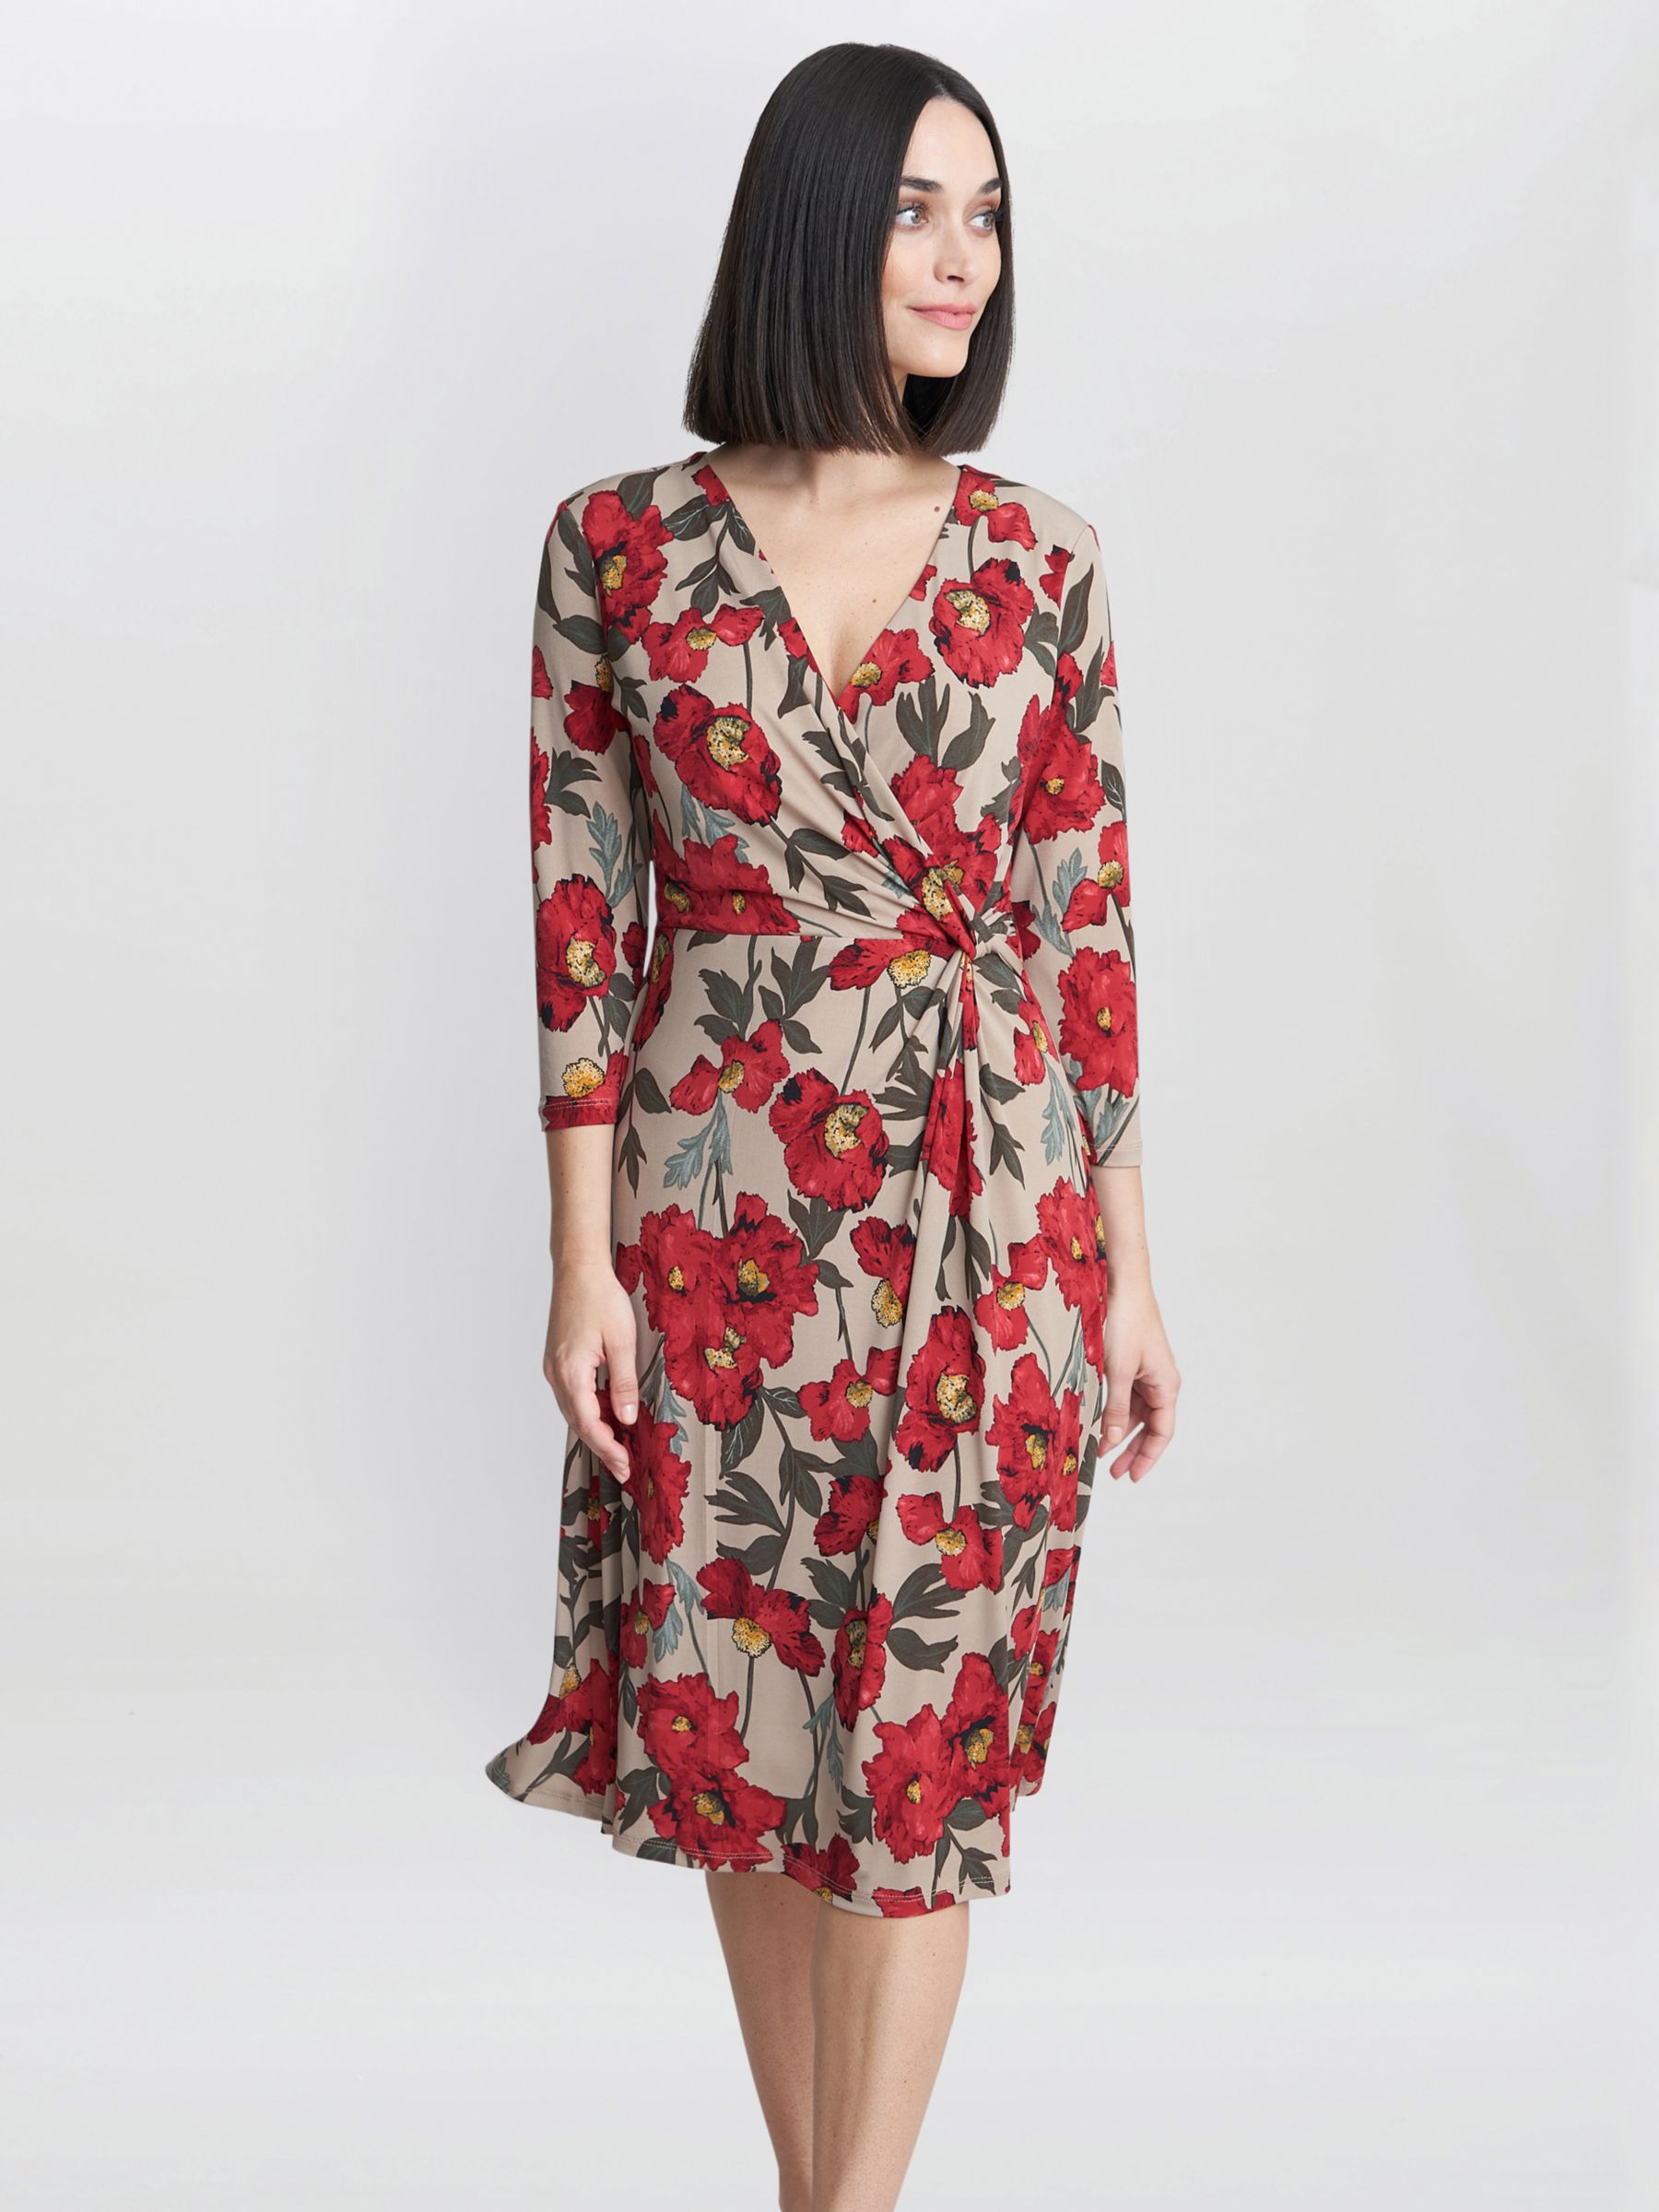 Gina Bacconi Cassidy Wrap Dress, Red/Beige at John Lewis & Partners